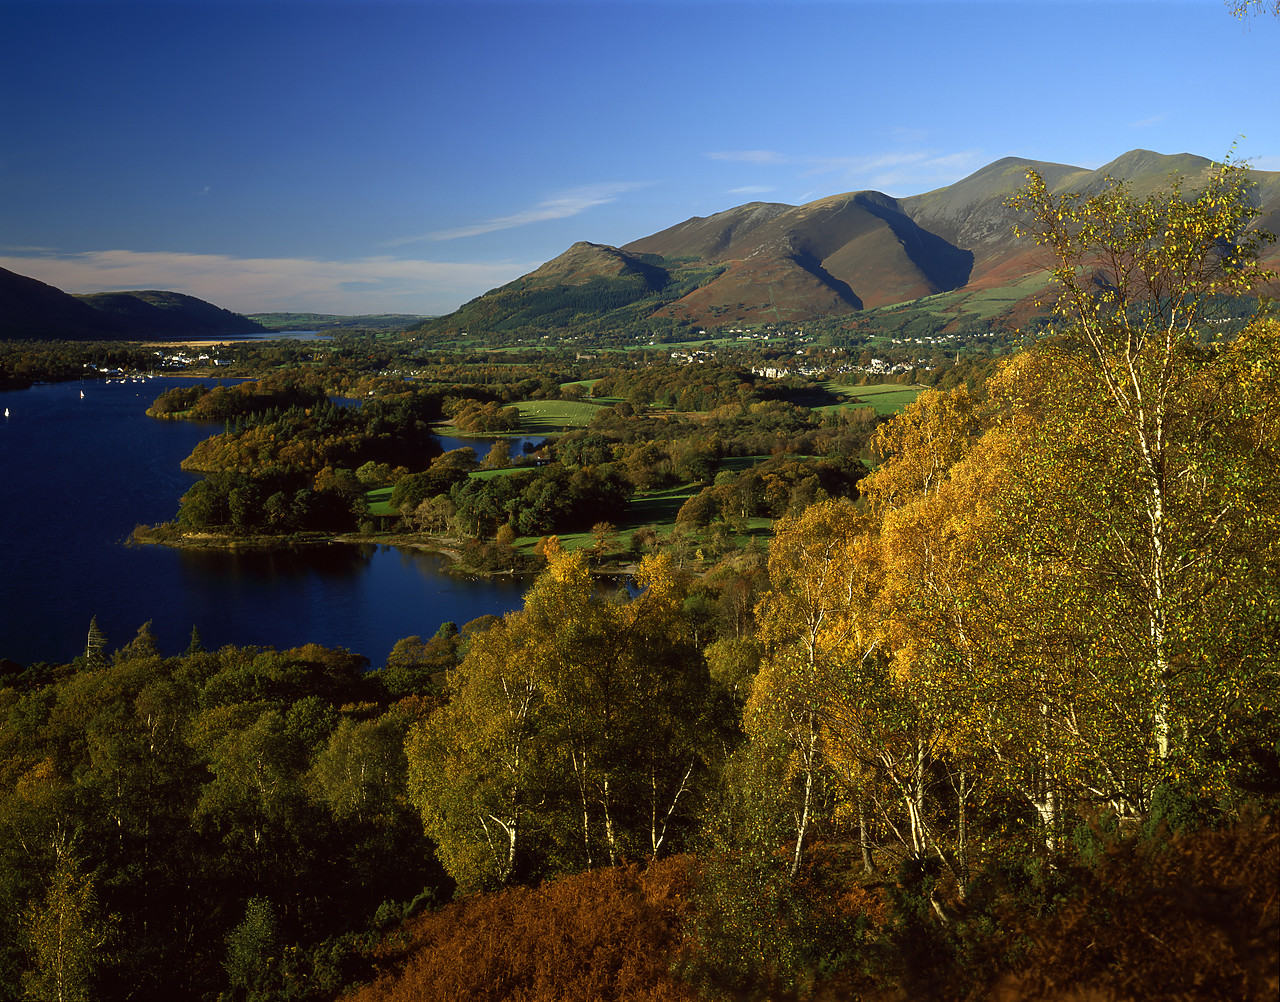 #060767-1 - View over Derwent Water, Lake District National Park, Cumbria, England